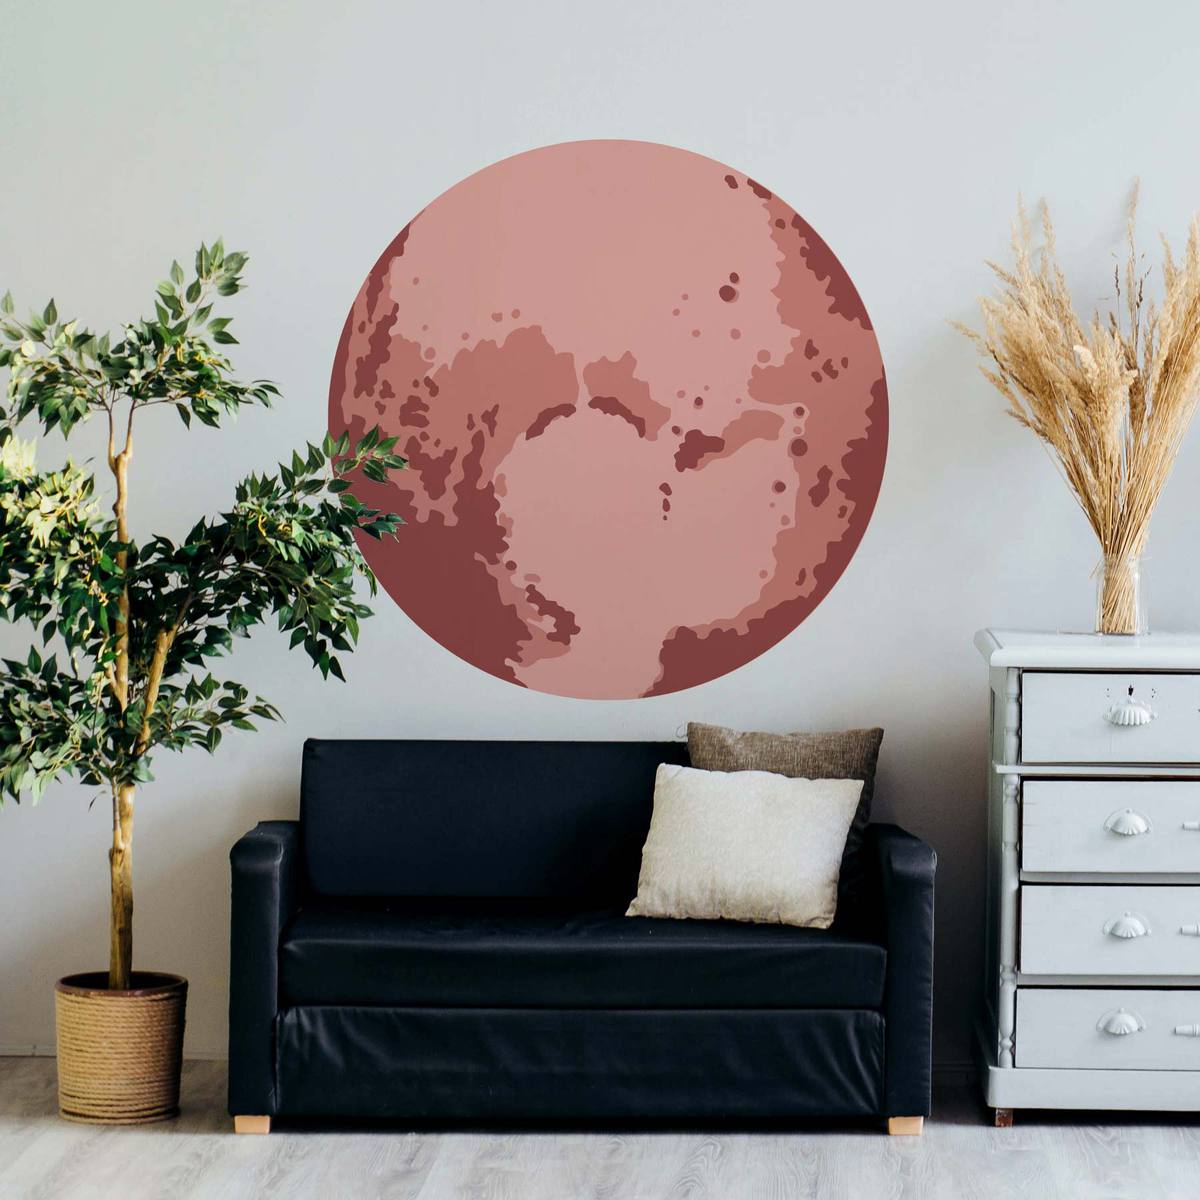 Pluto wall mural stencil in living room